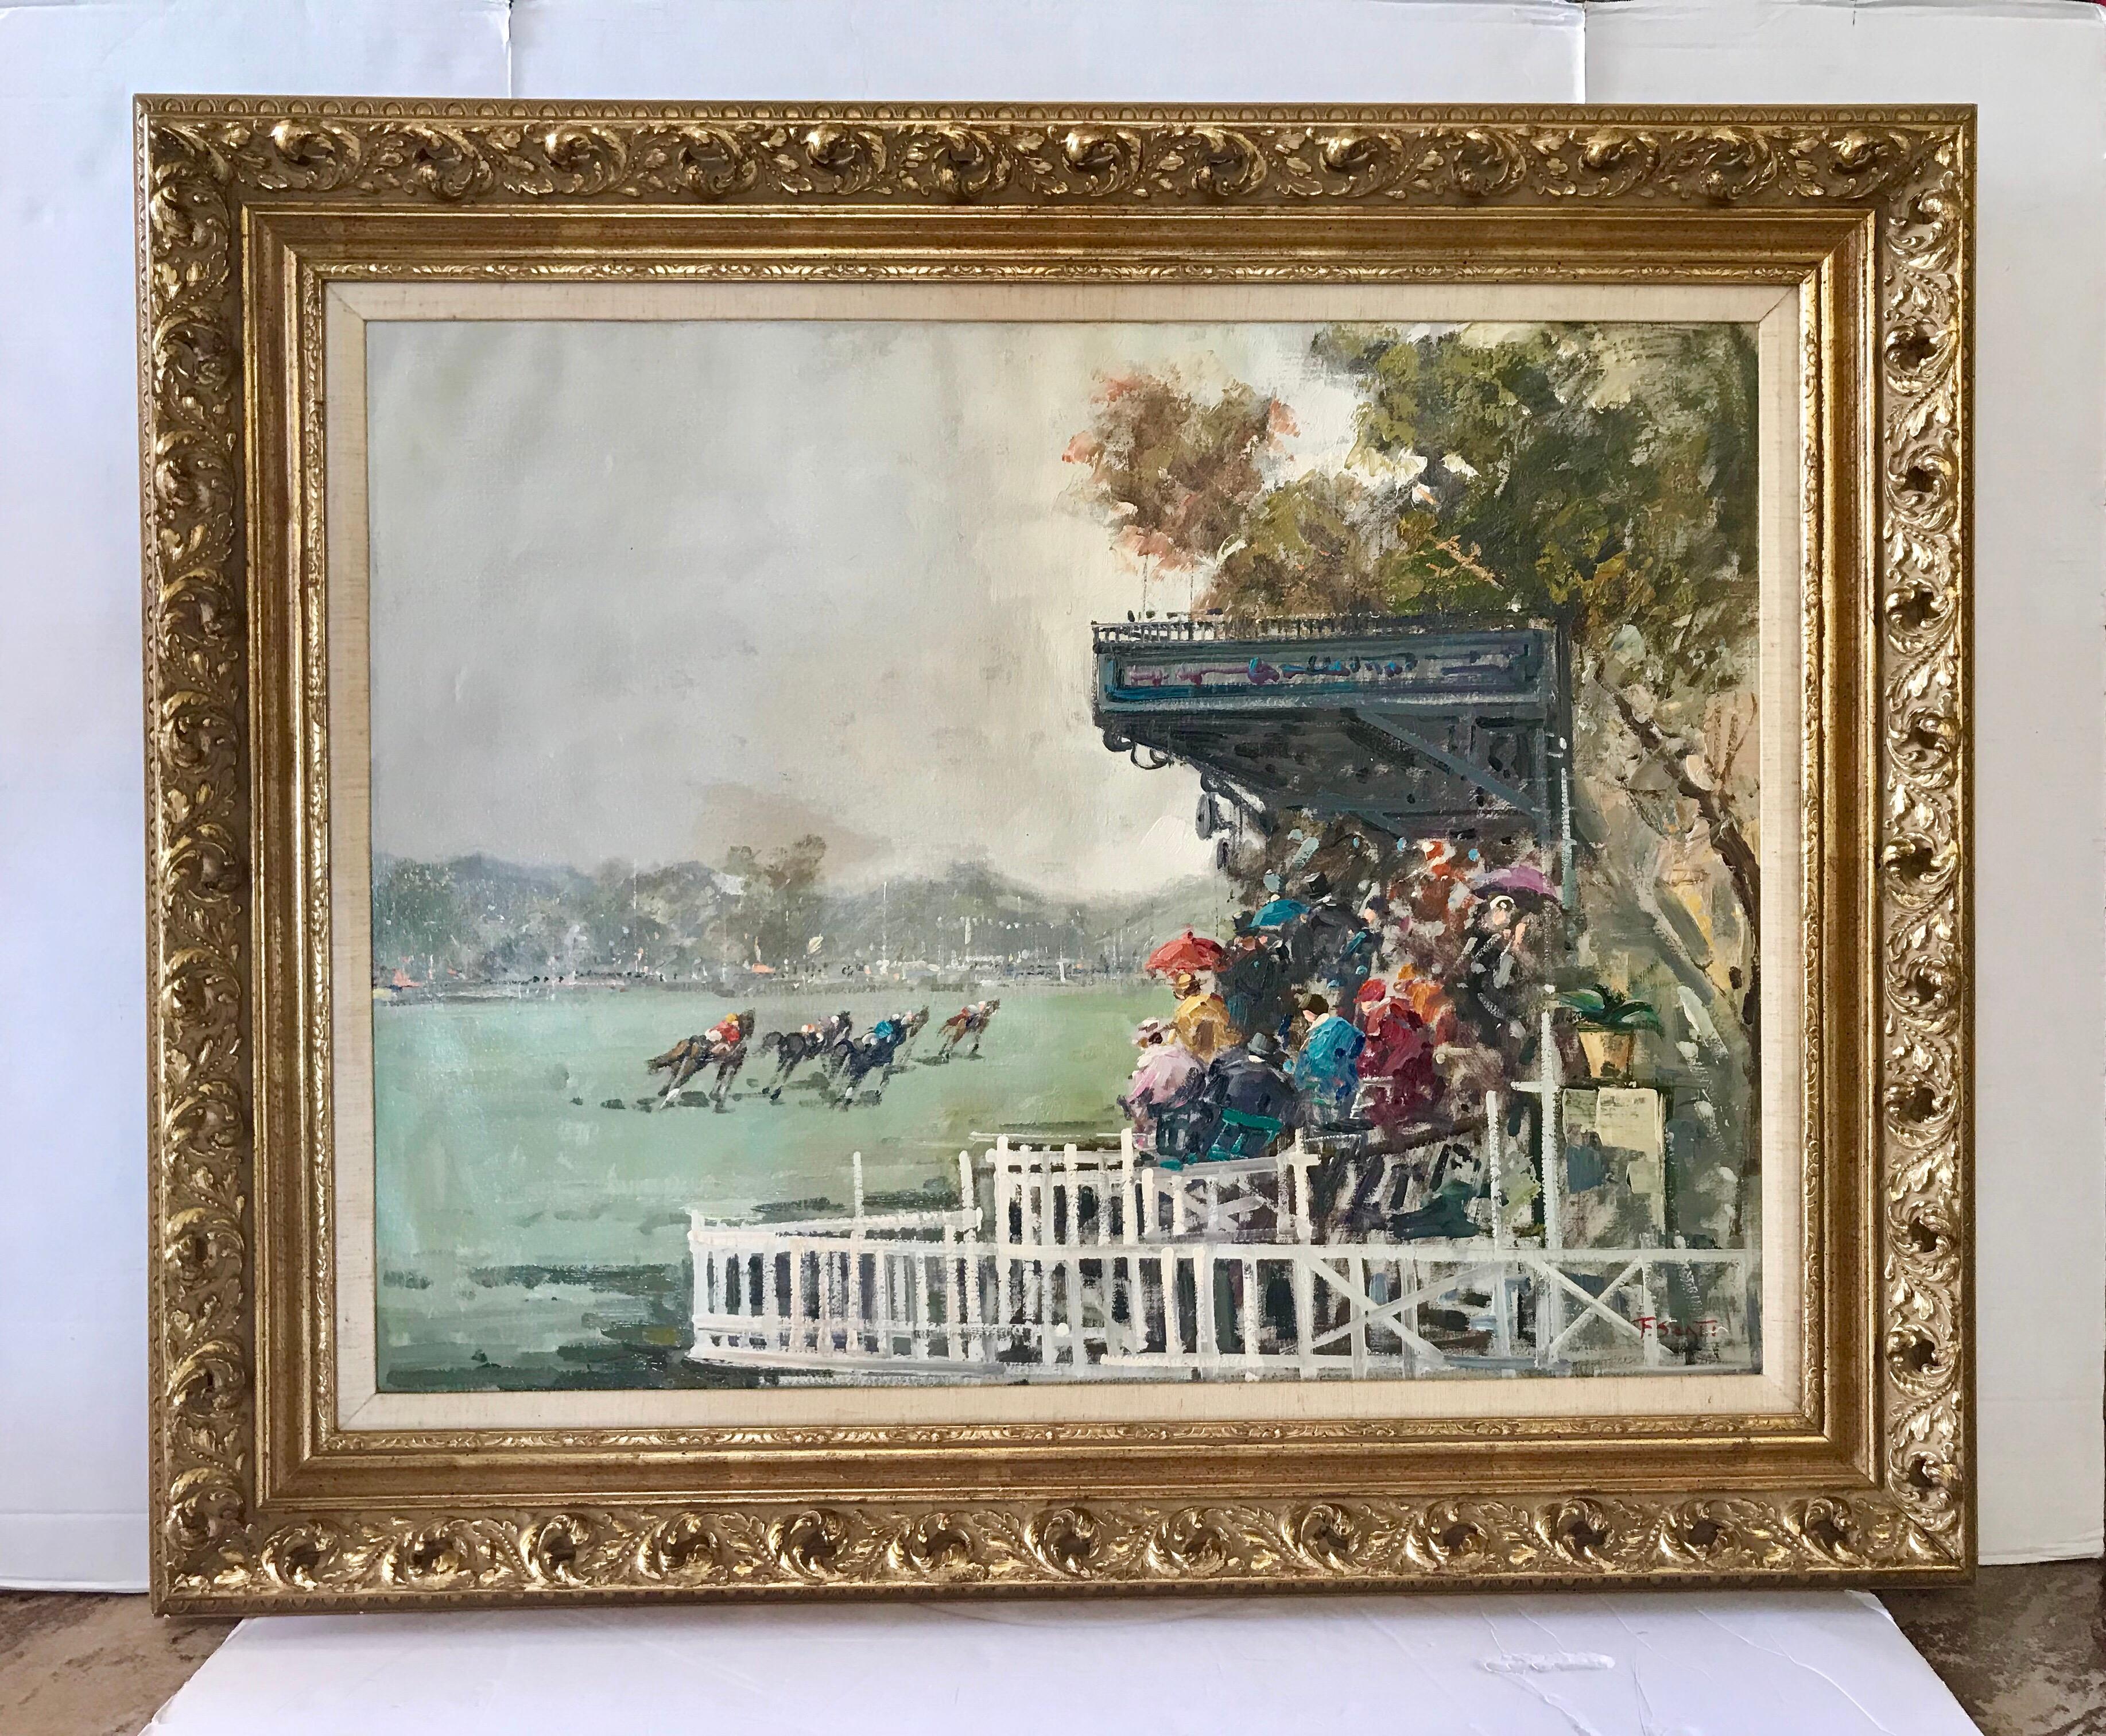 Elegant oil on board original framed painting signed by the artist F. Sarti in lower right.
The scene depicted appears to be an equestrian event or race of some sort. Gilt frame
is stunning and in great condition.